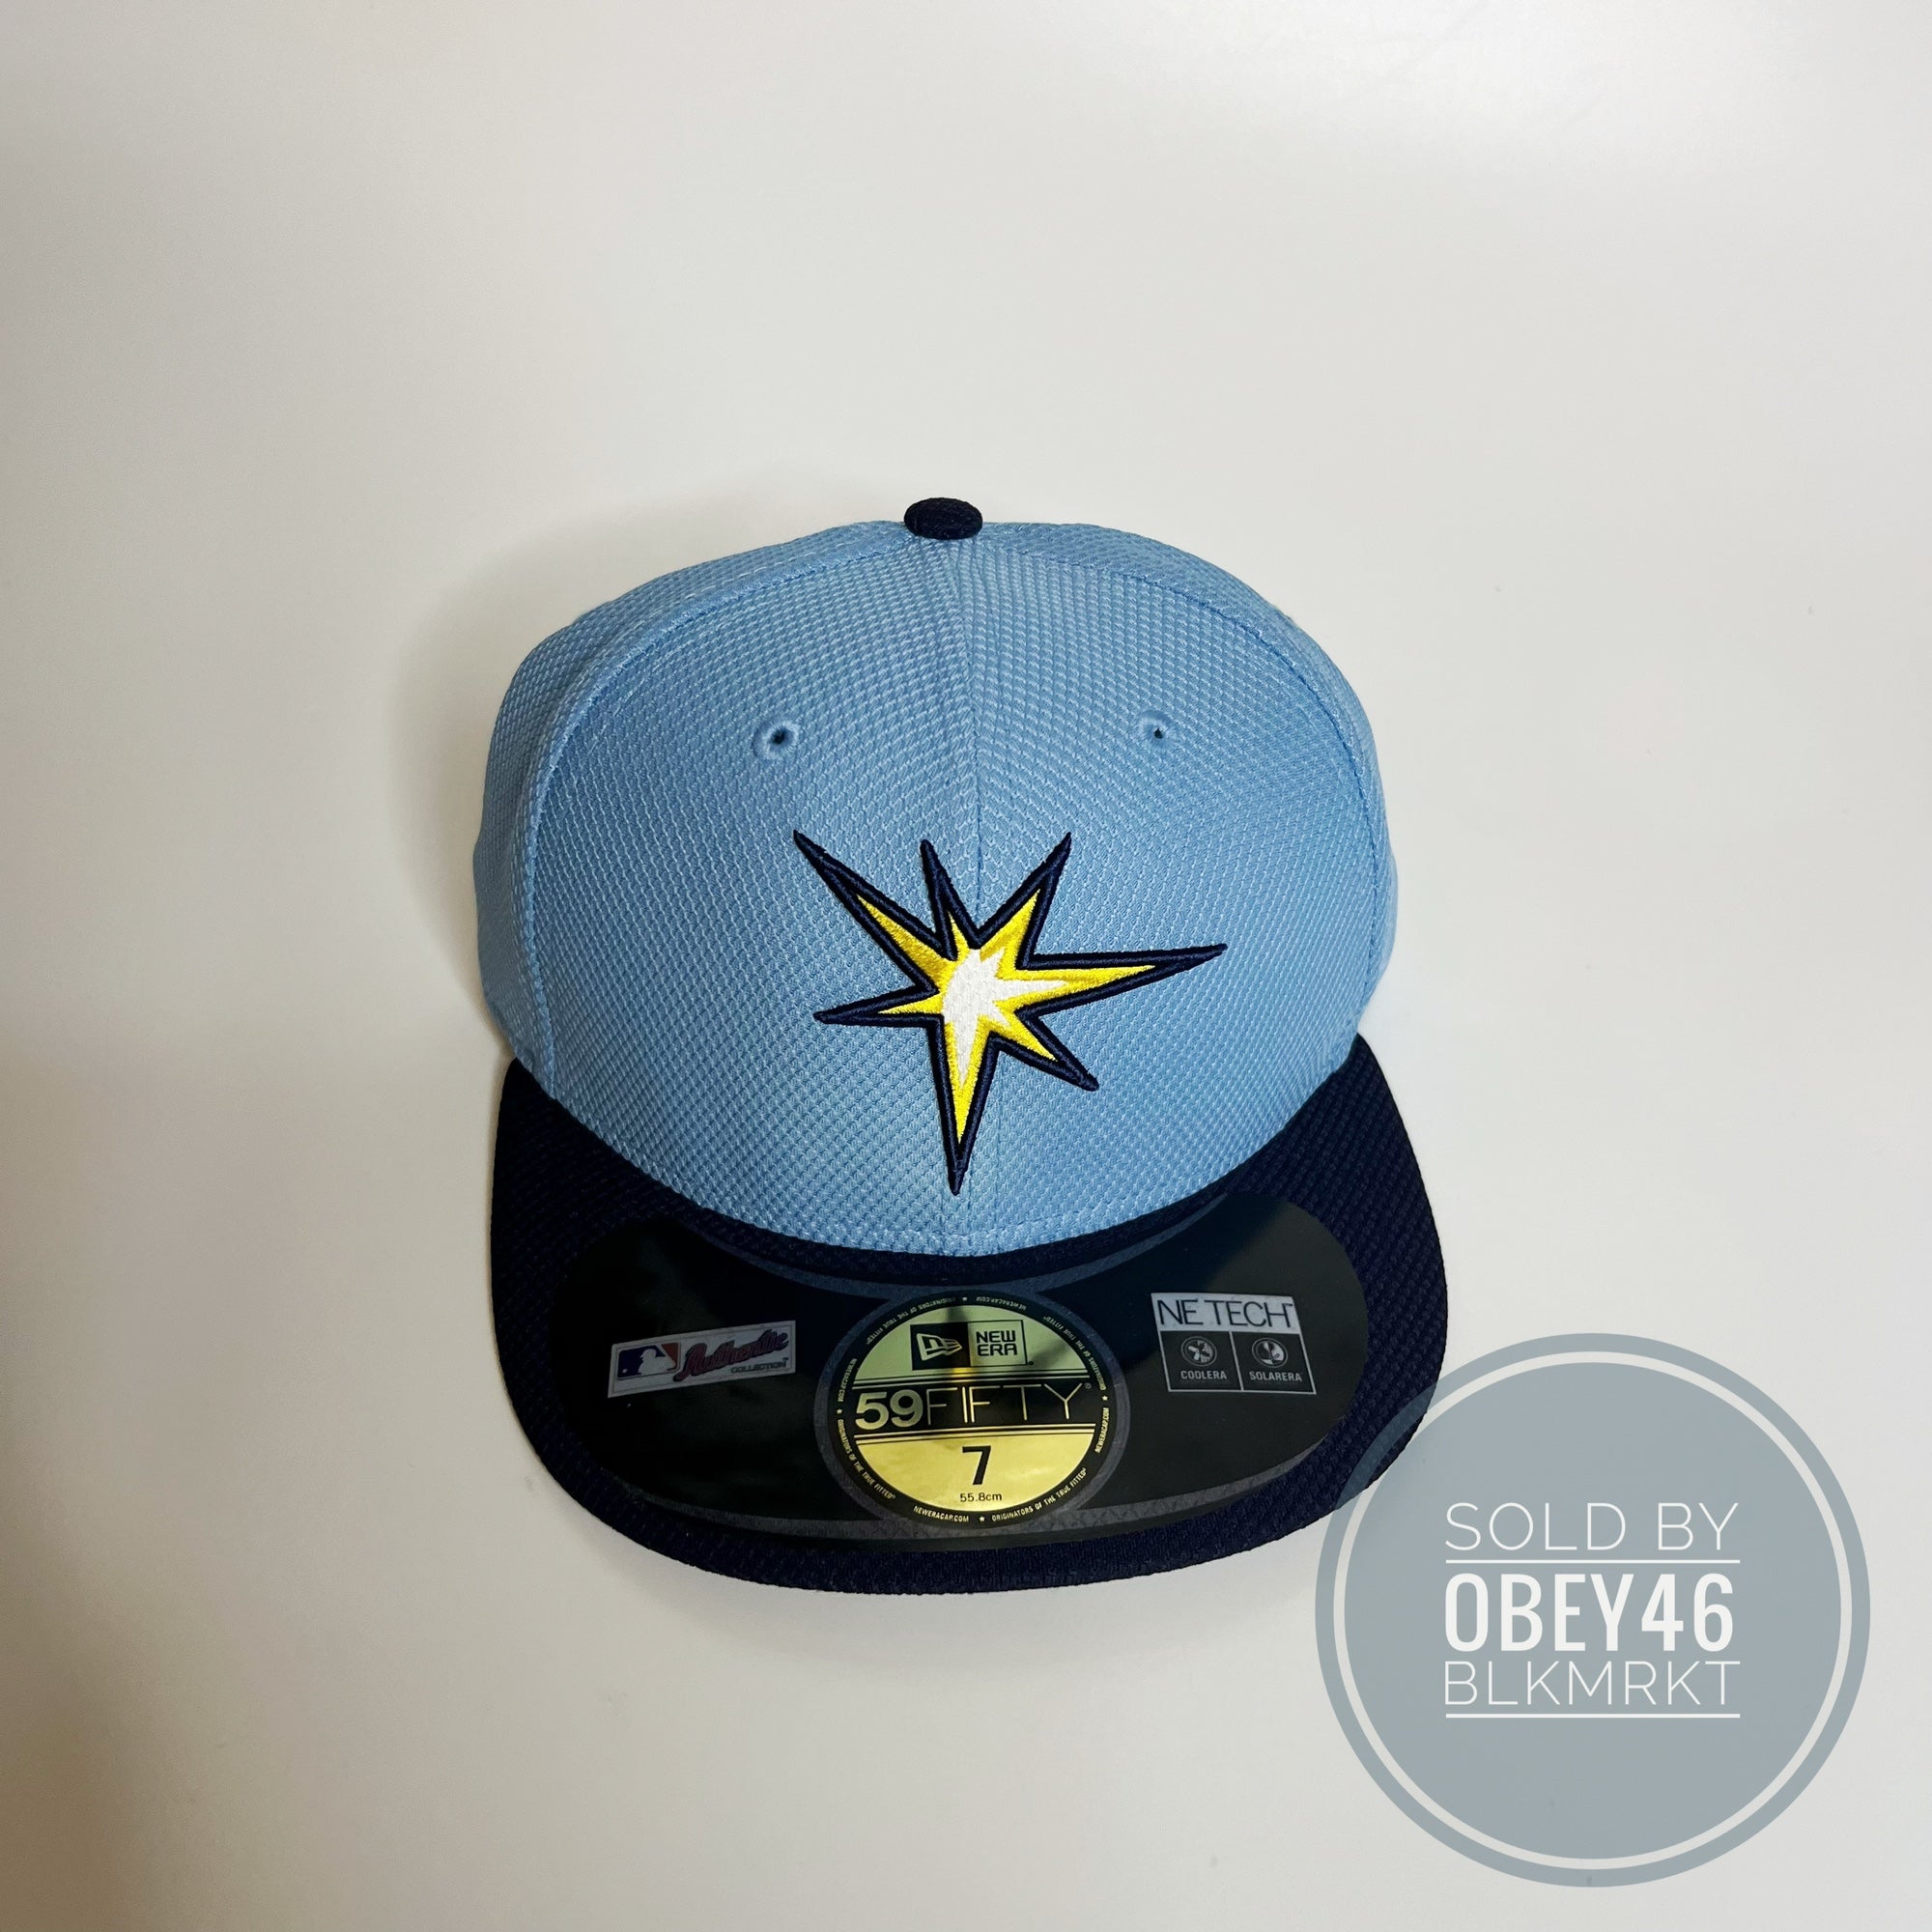 Tampa Bay Rays Snapback New Era Heather Graphite Cap Hat Charcoal Navy –  THE 4TH QUARTER